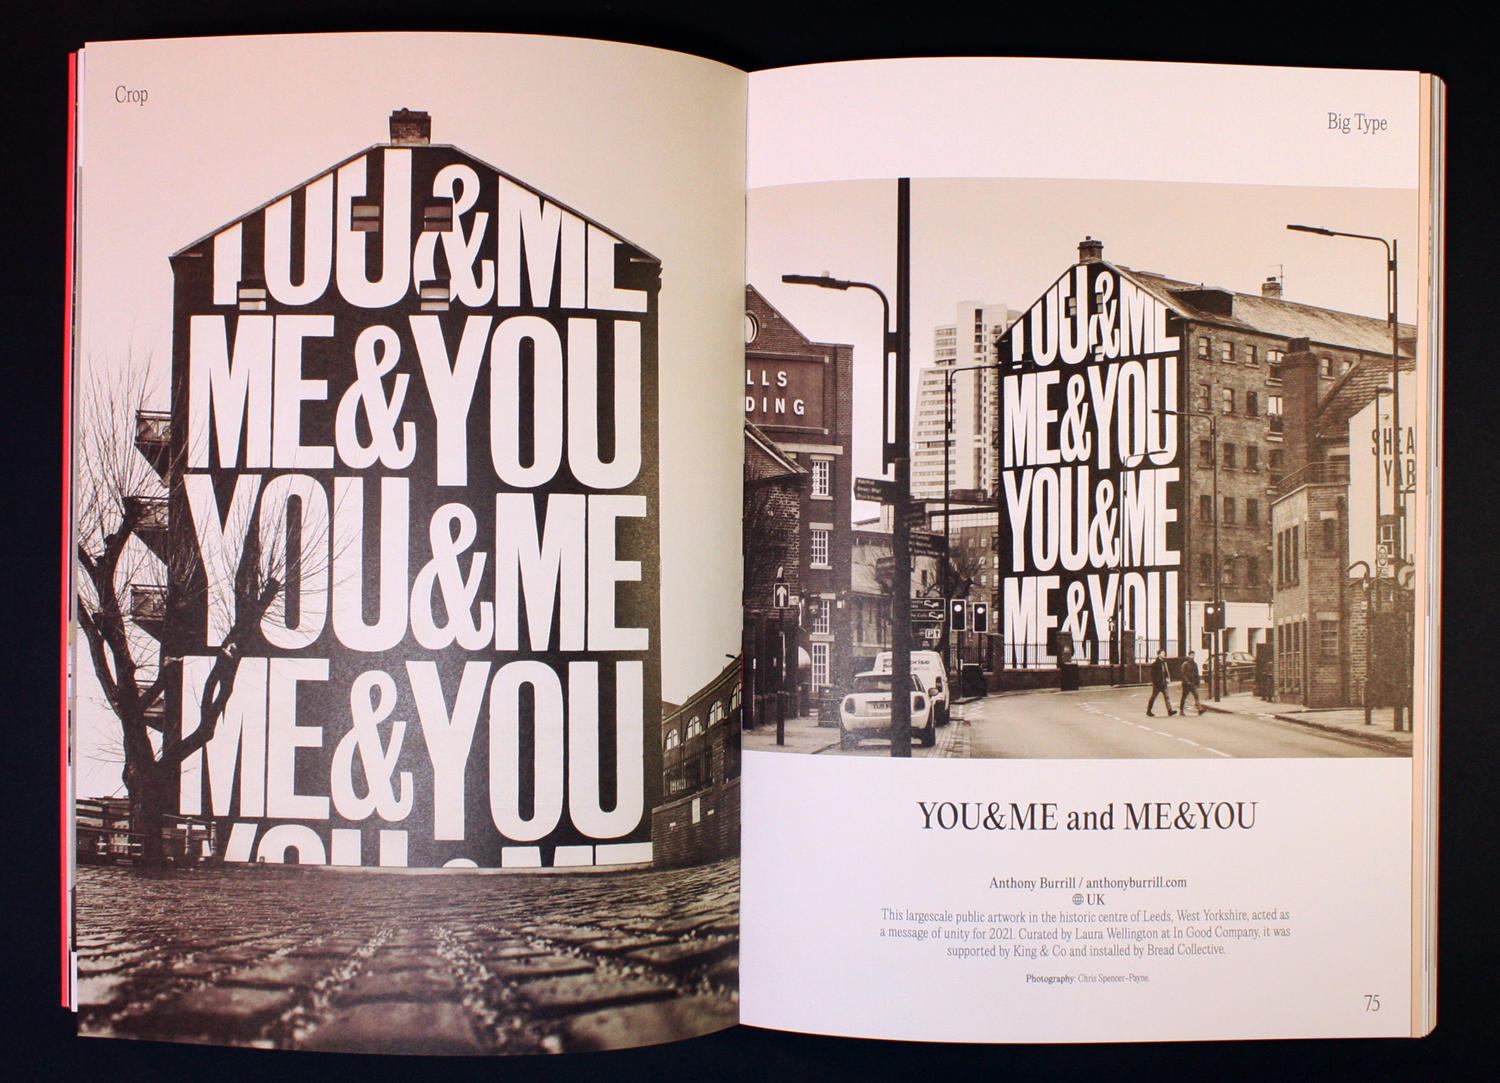 Spread from the ‘Crop’ chapter of the book featuring large scale public artwork in Leeds, UK, by designer Anthony Burrill.